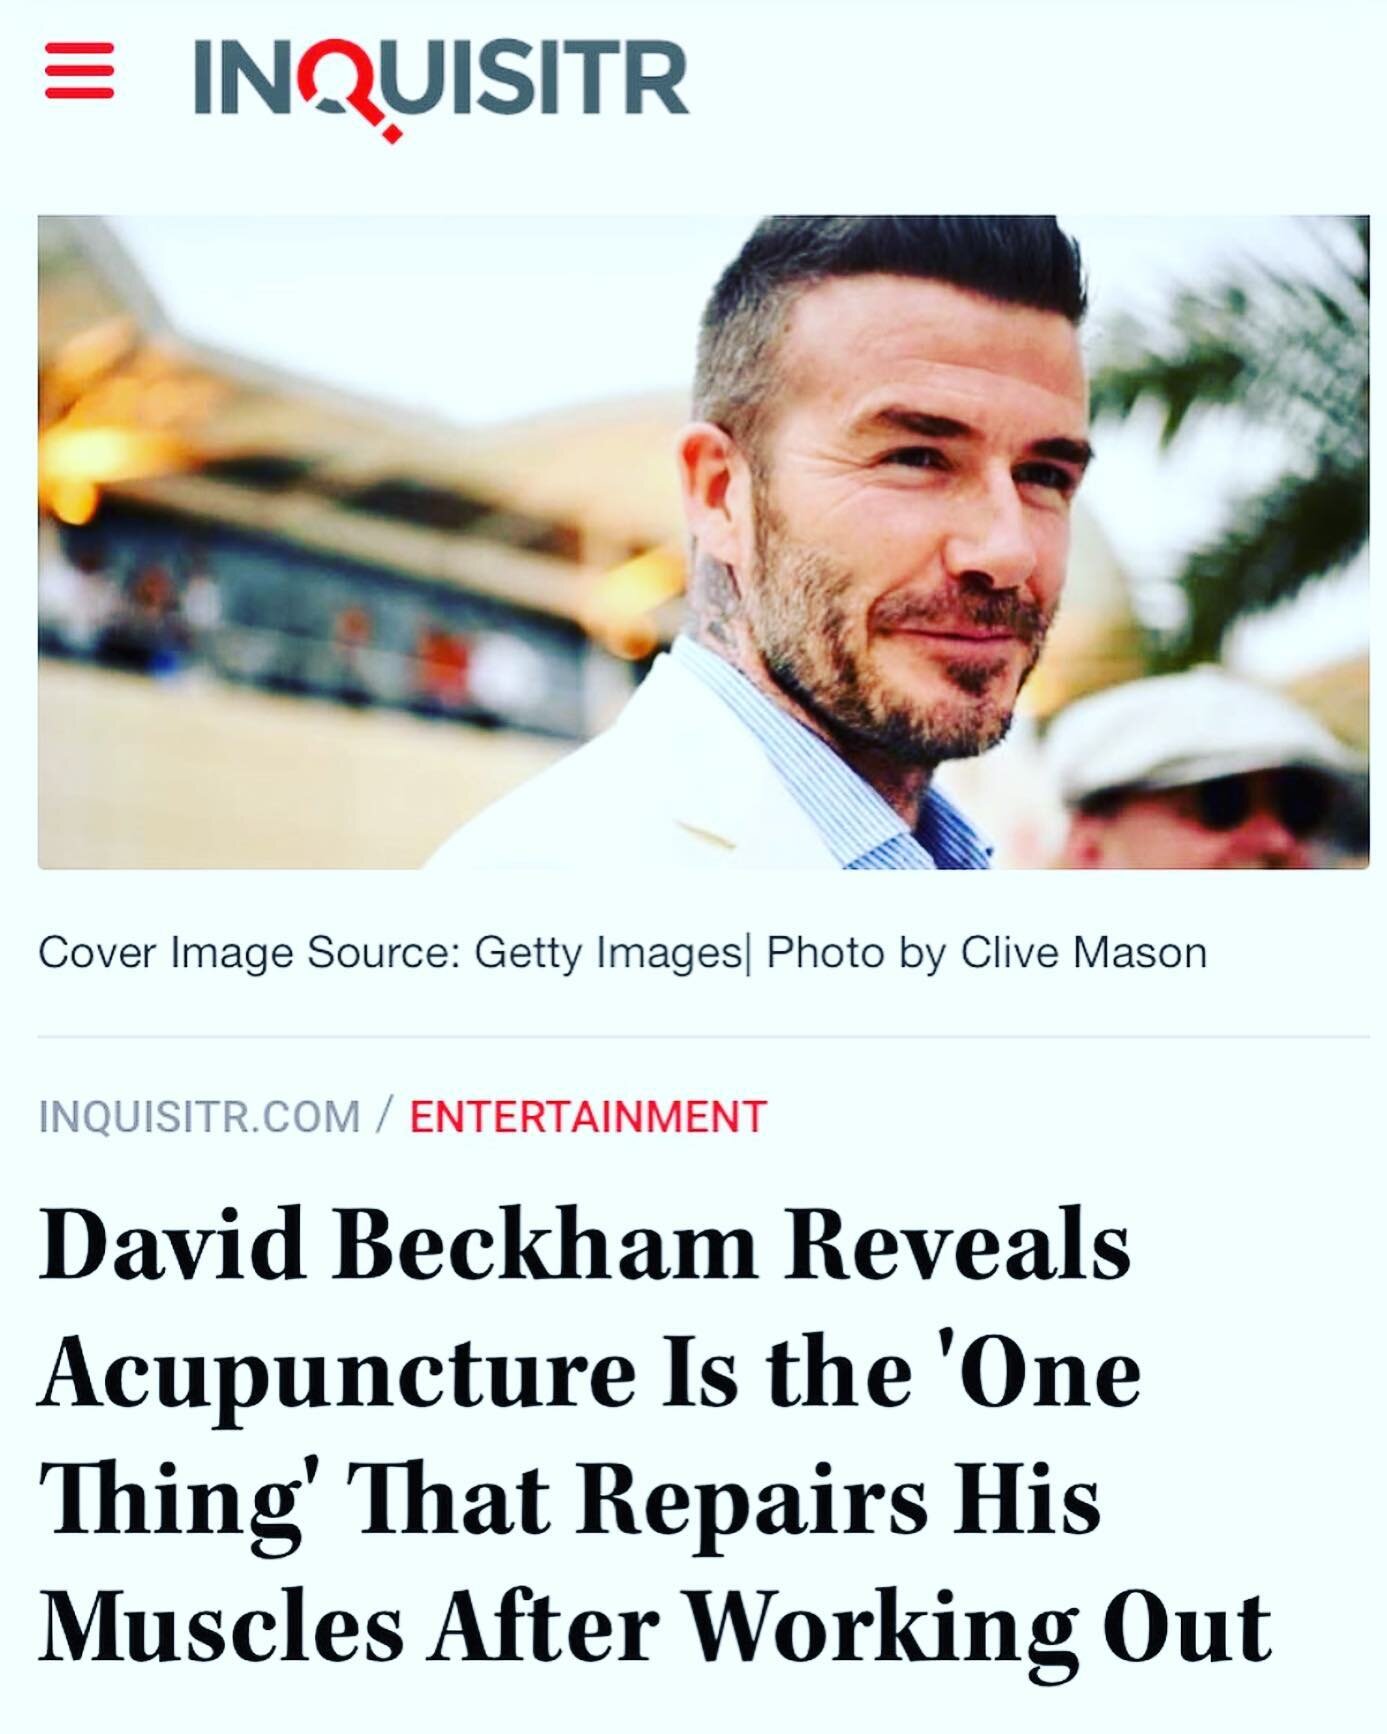 David Beckham knows what&rsquo;s up!! Acupuncture works!